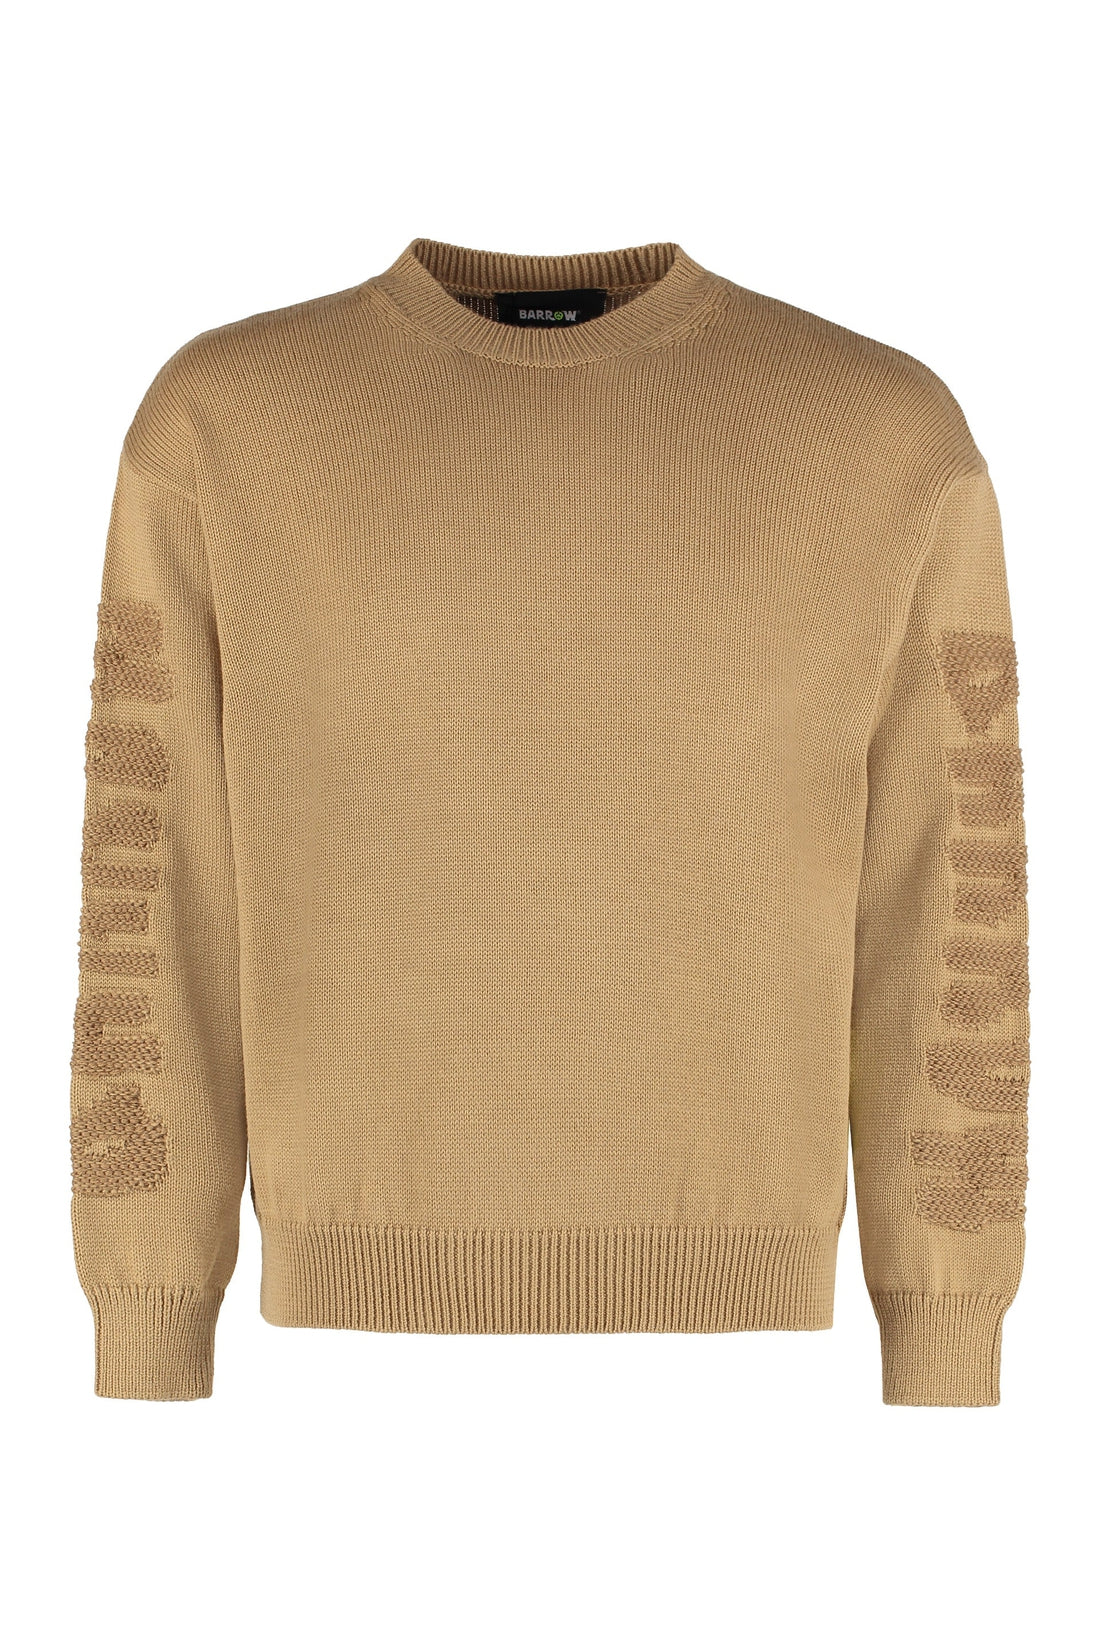 Barrow-OUTLET-SALE-Long sleeve crew-neck sweater-ARCHIVIST